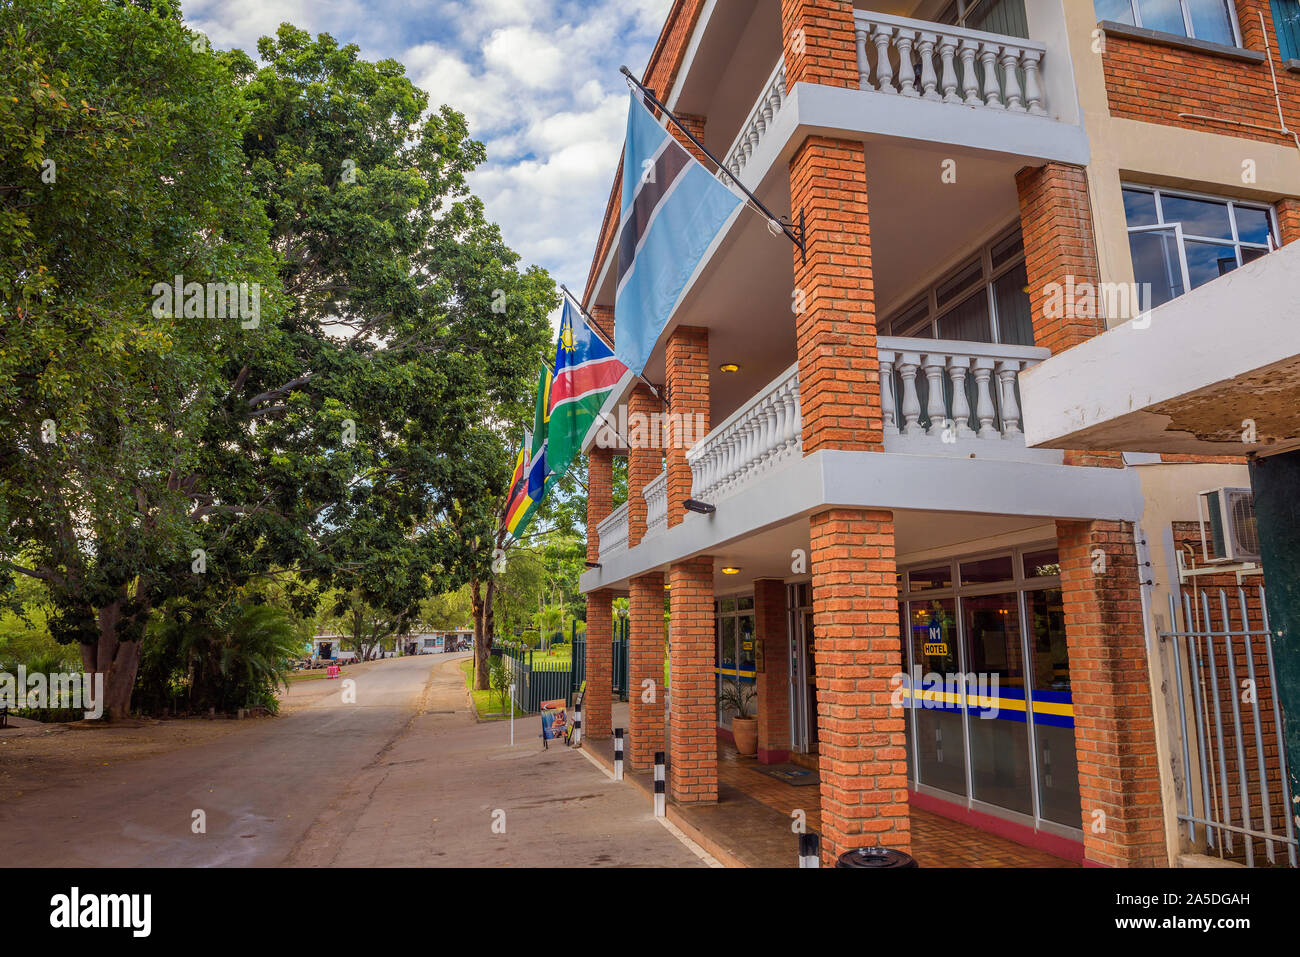 Entrance to the N1 Hotel in Victoria Falls, Zimbabwe Stock Photo